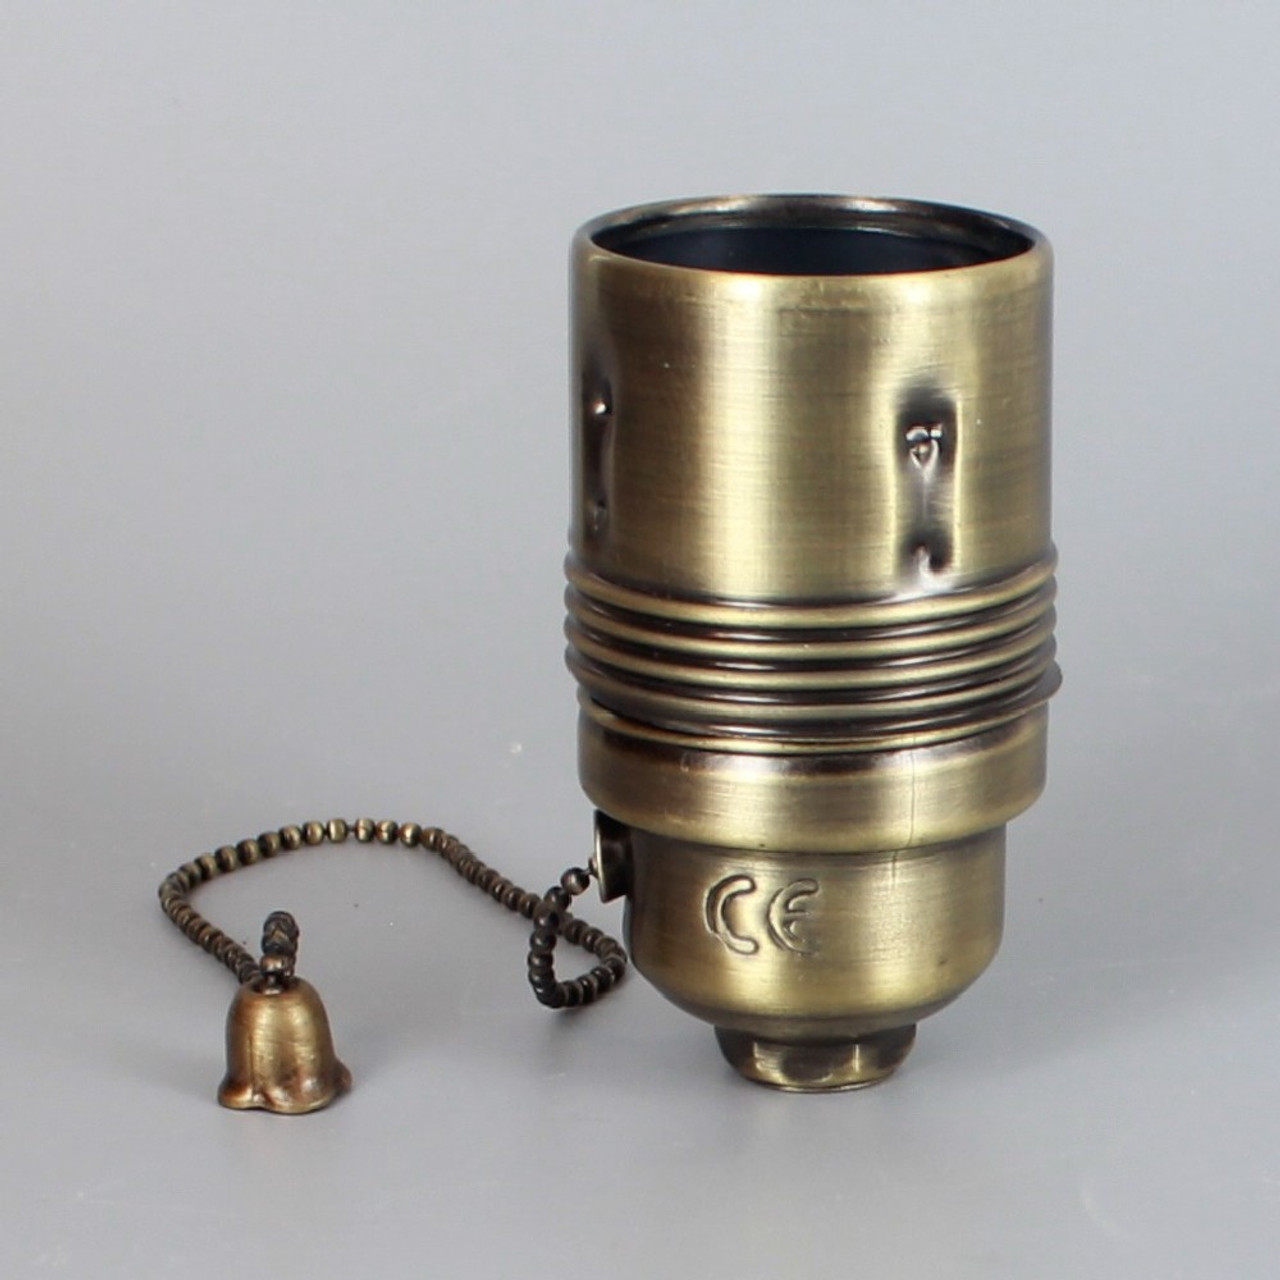 Antique Brass Finish E27 Base Pull Chain Switch Lamp Socket With 1/8ips  Threaded Cap. CE Rated.